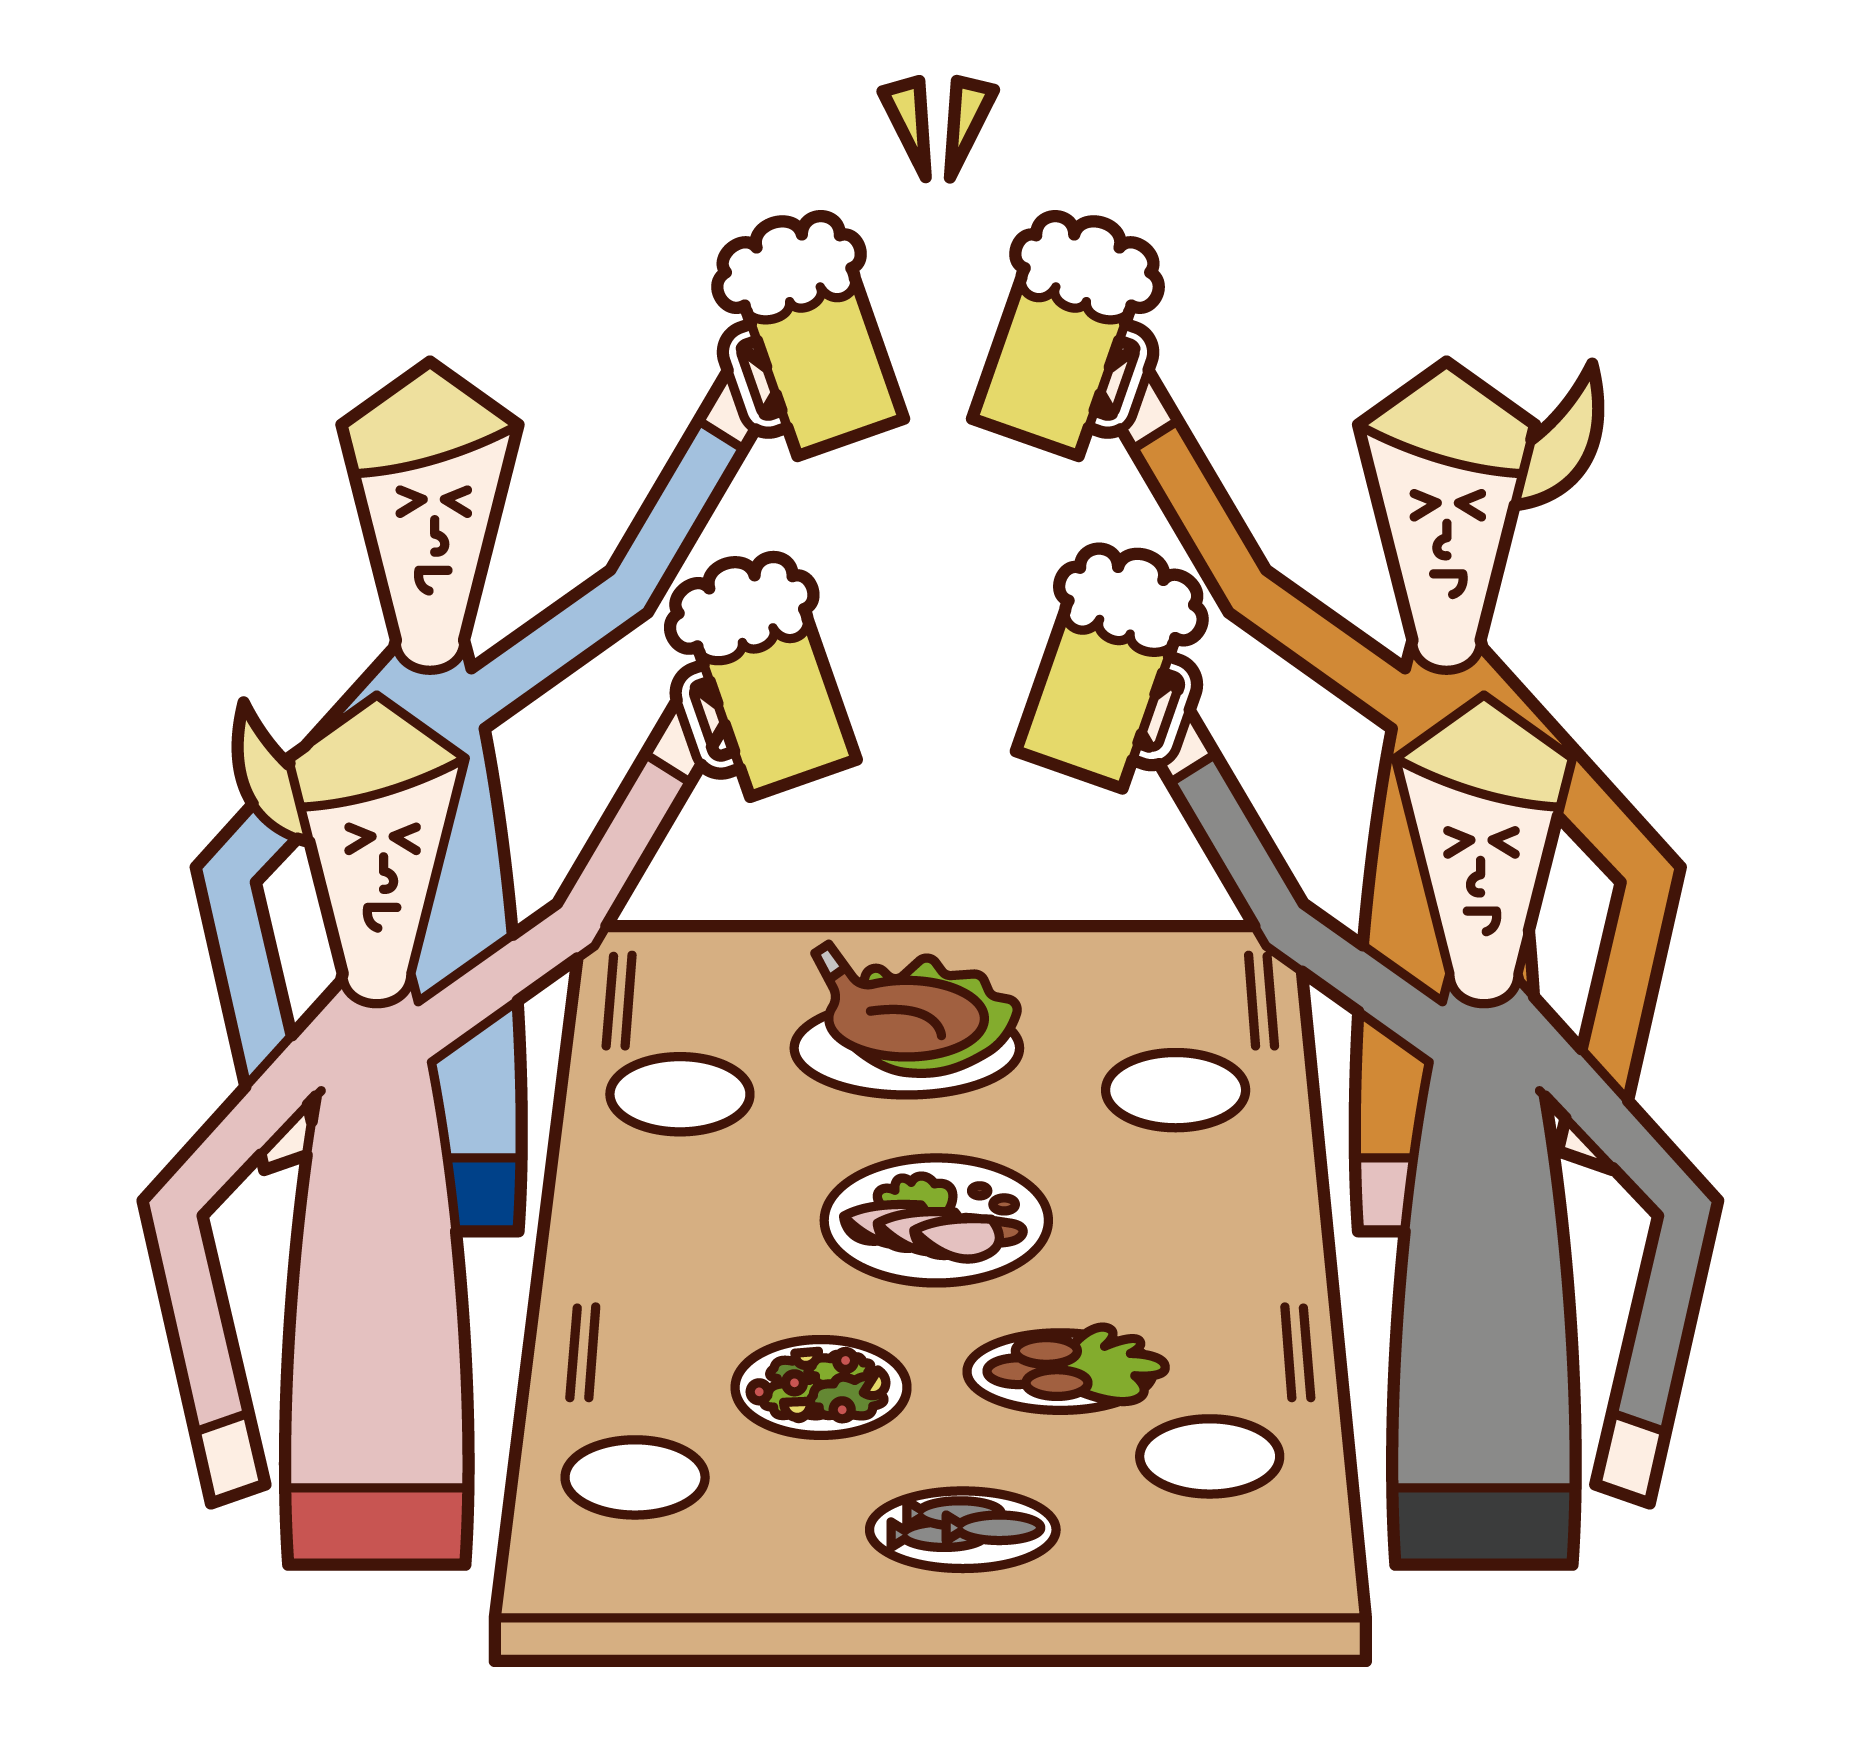 Illustration of people (men and women) toasting at a drinking party